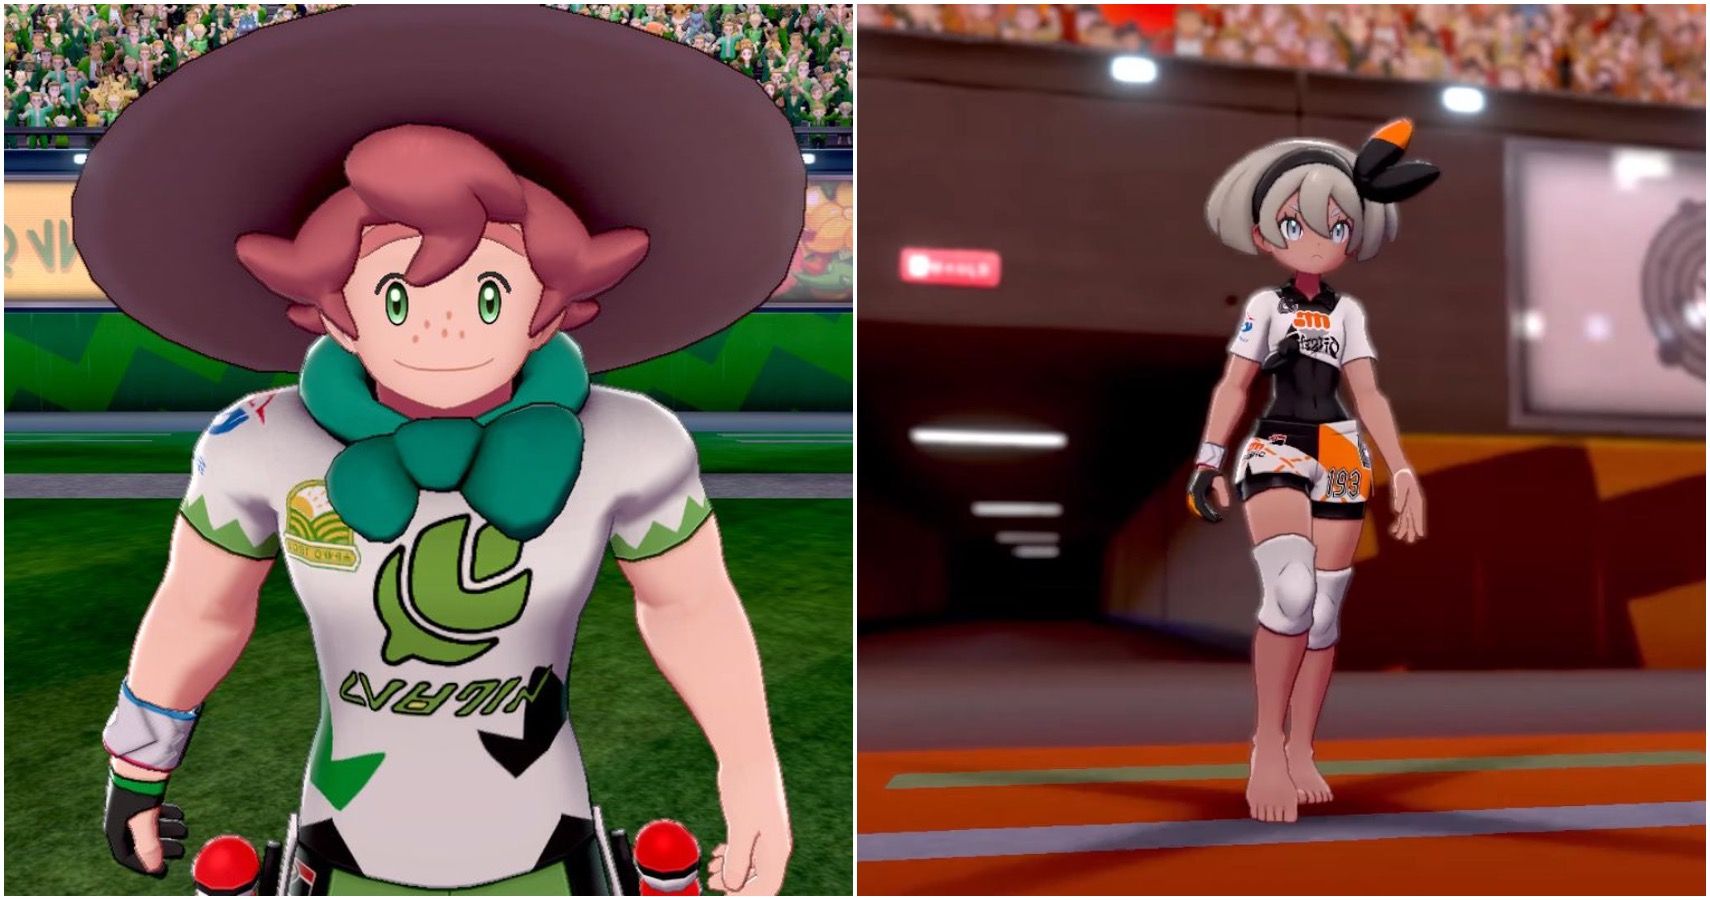 Pokémon Sword & Shield: Ranking Every Gym Leader Based On Personality